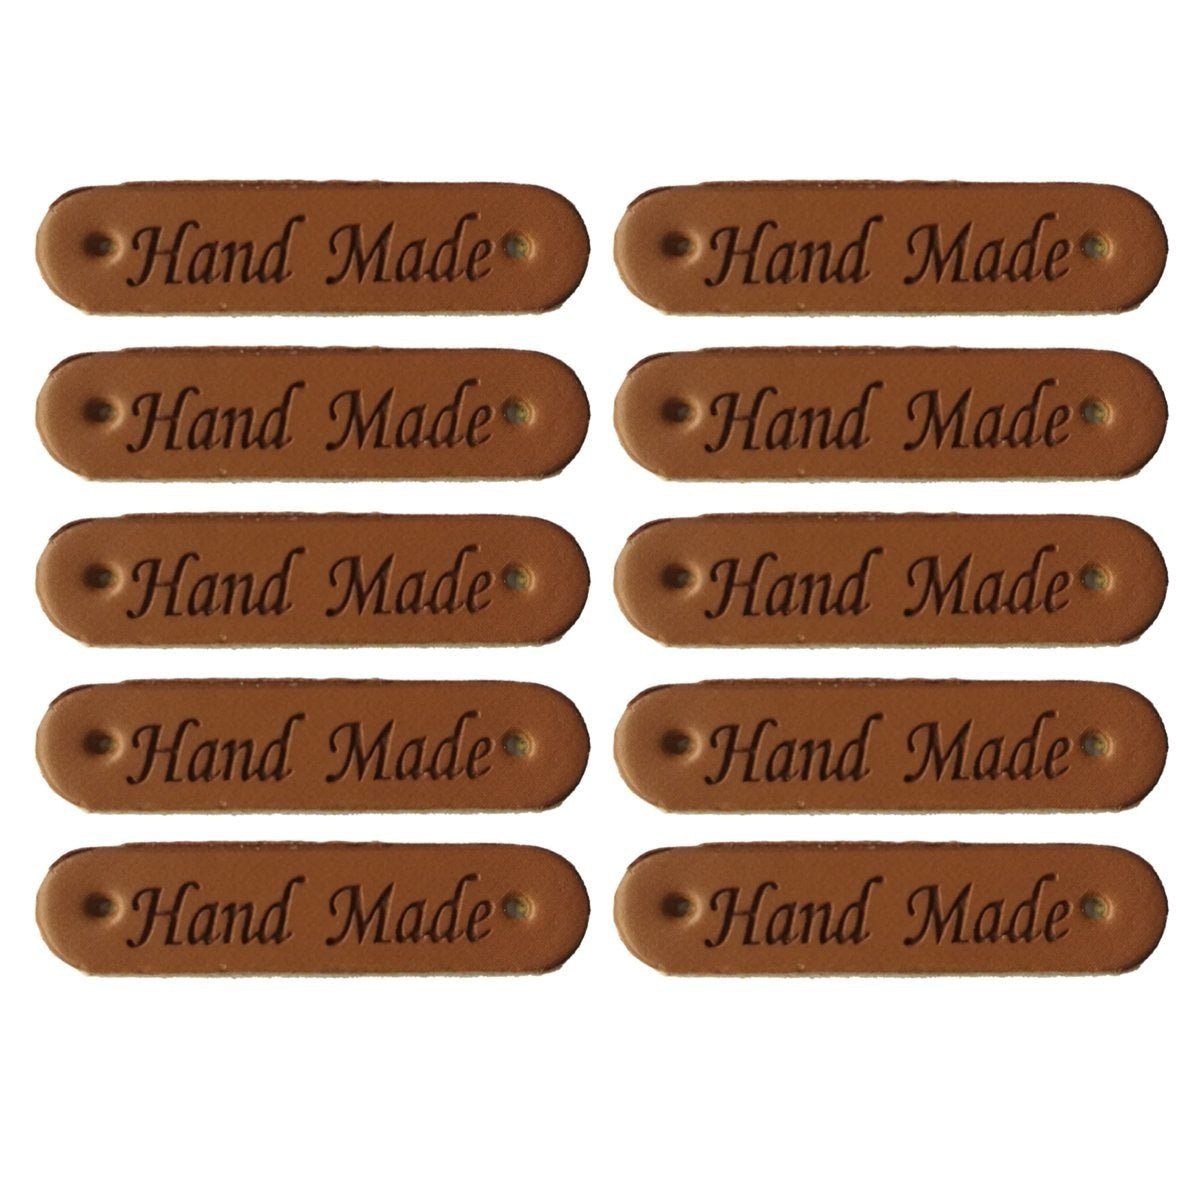 12pcs Faux Leather Clothing Labels for Handmade Clothes Goods DIY Sewing Tags Hand Made - Brown Rounded Small - - Asia Sell